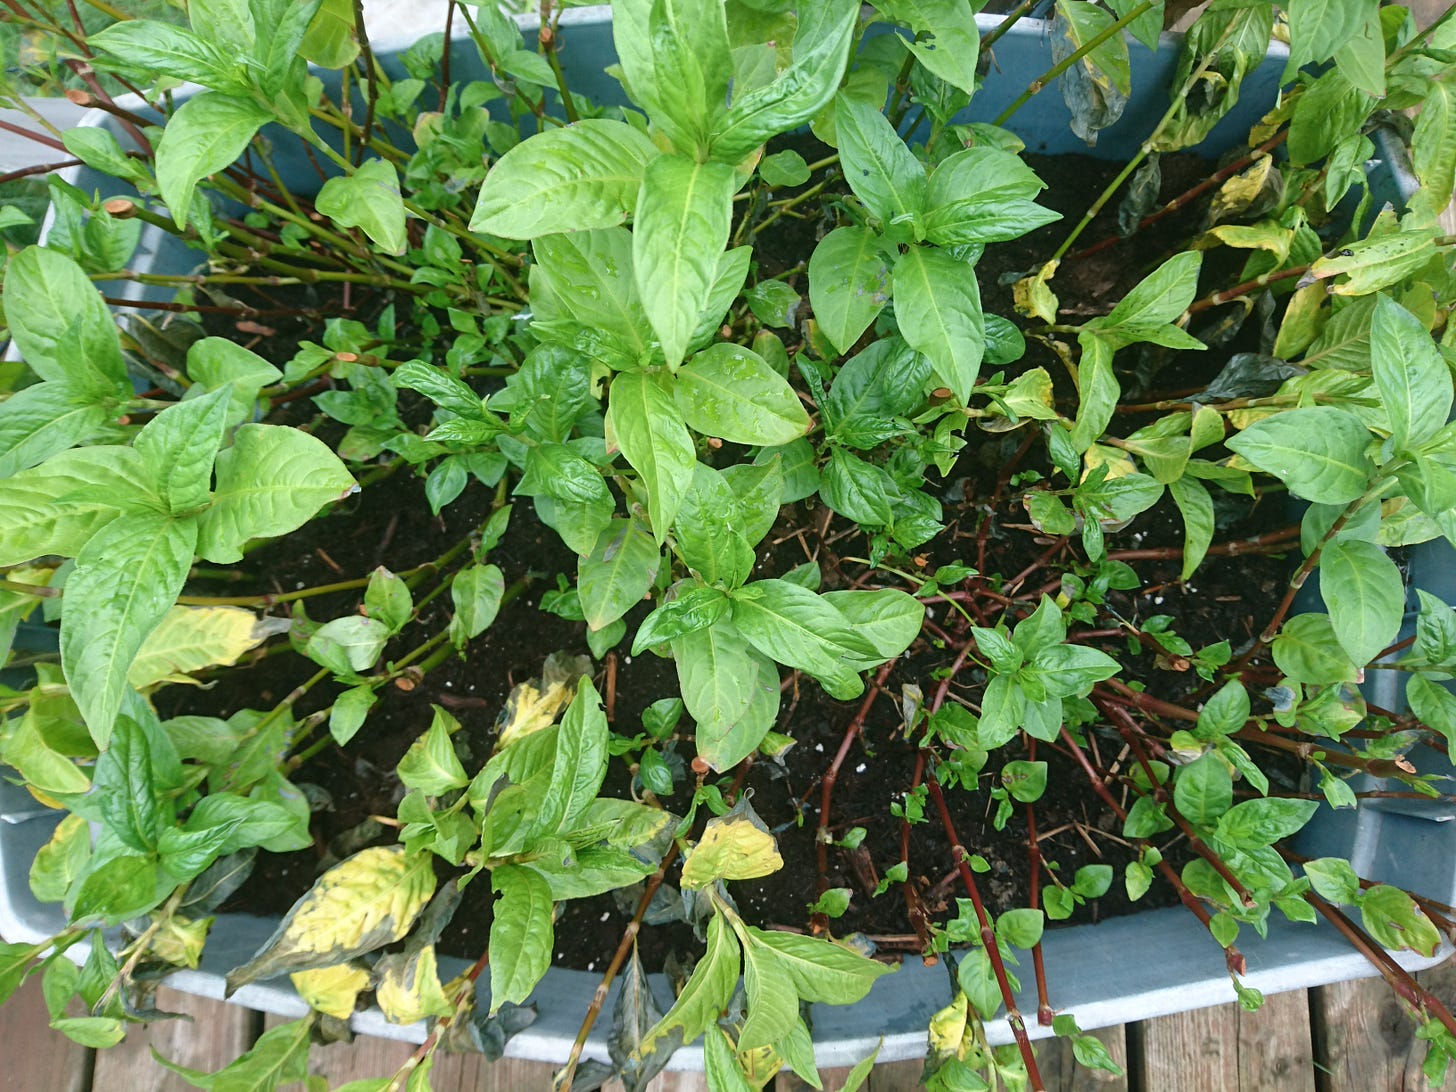 light yellow green leaves sit sparely scattered on stems of indigo above dark brown soil